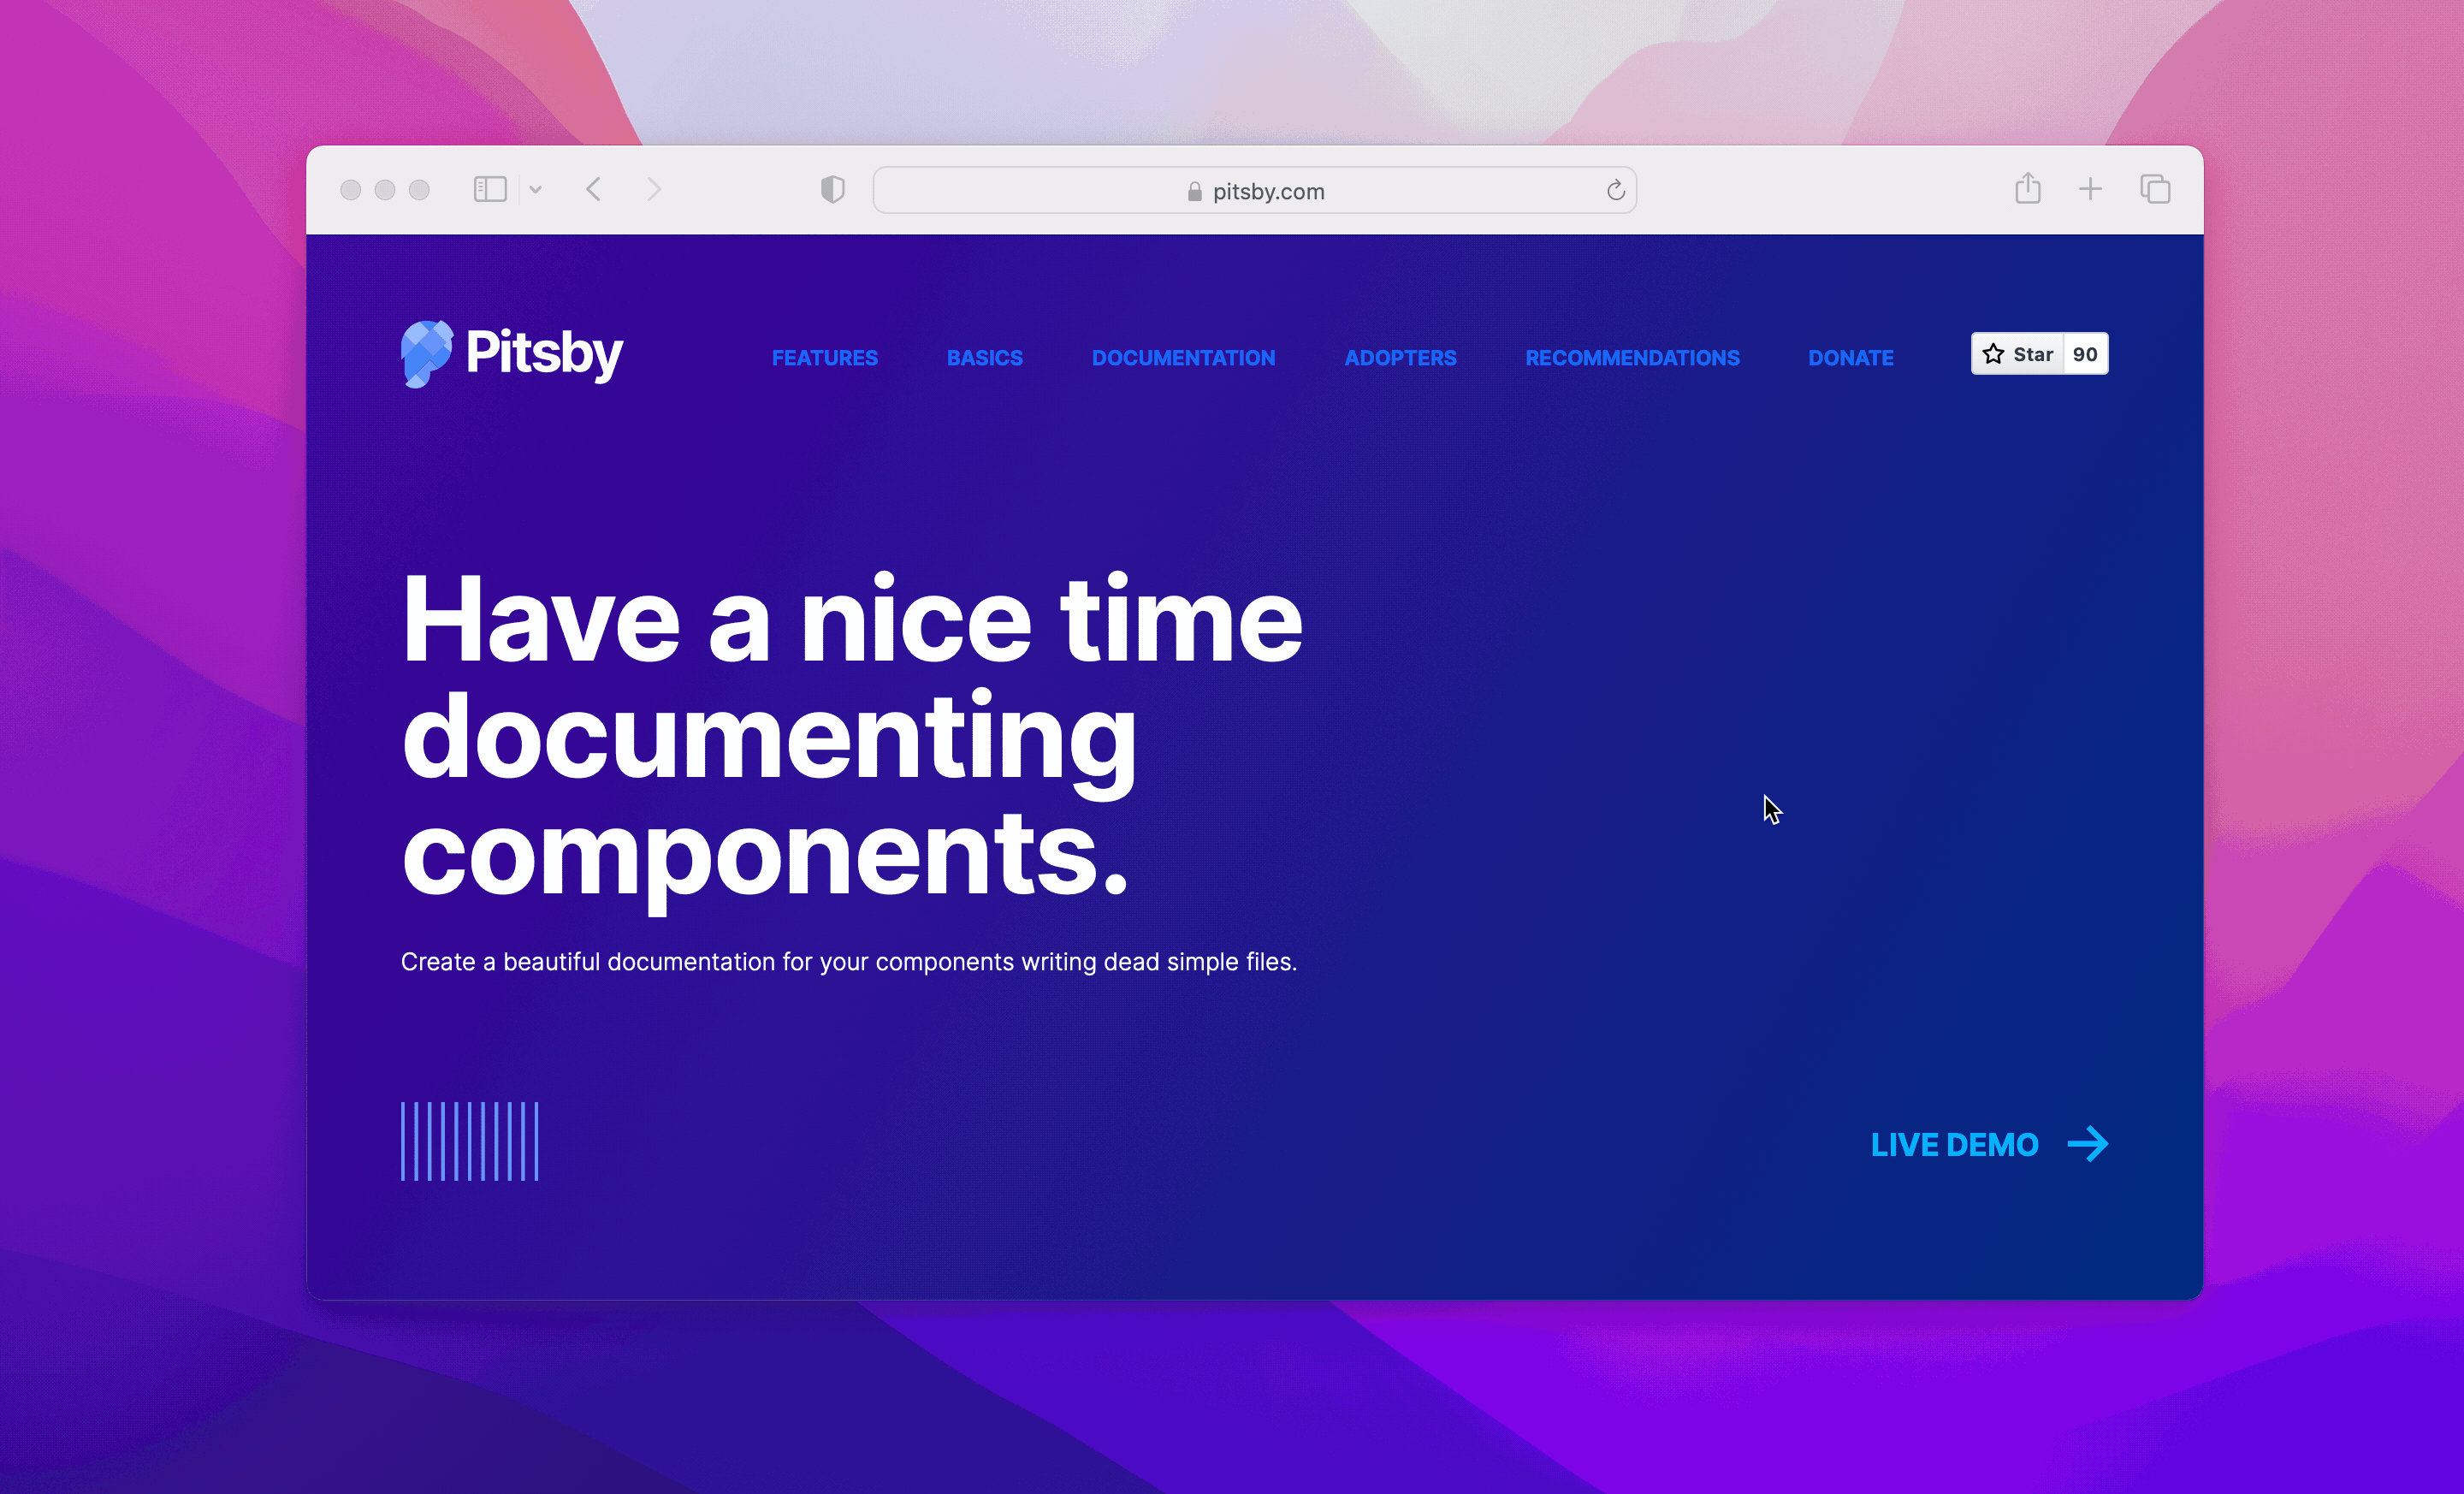 An animation showing Pitsby's website footer and Plausible's public dashboard